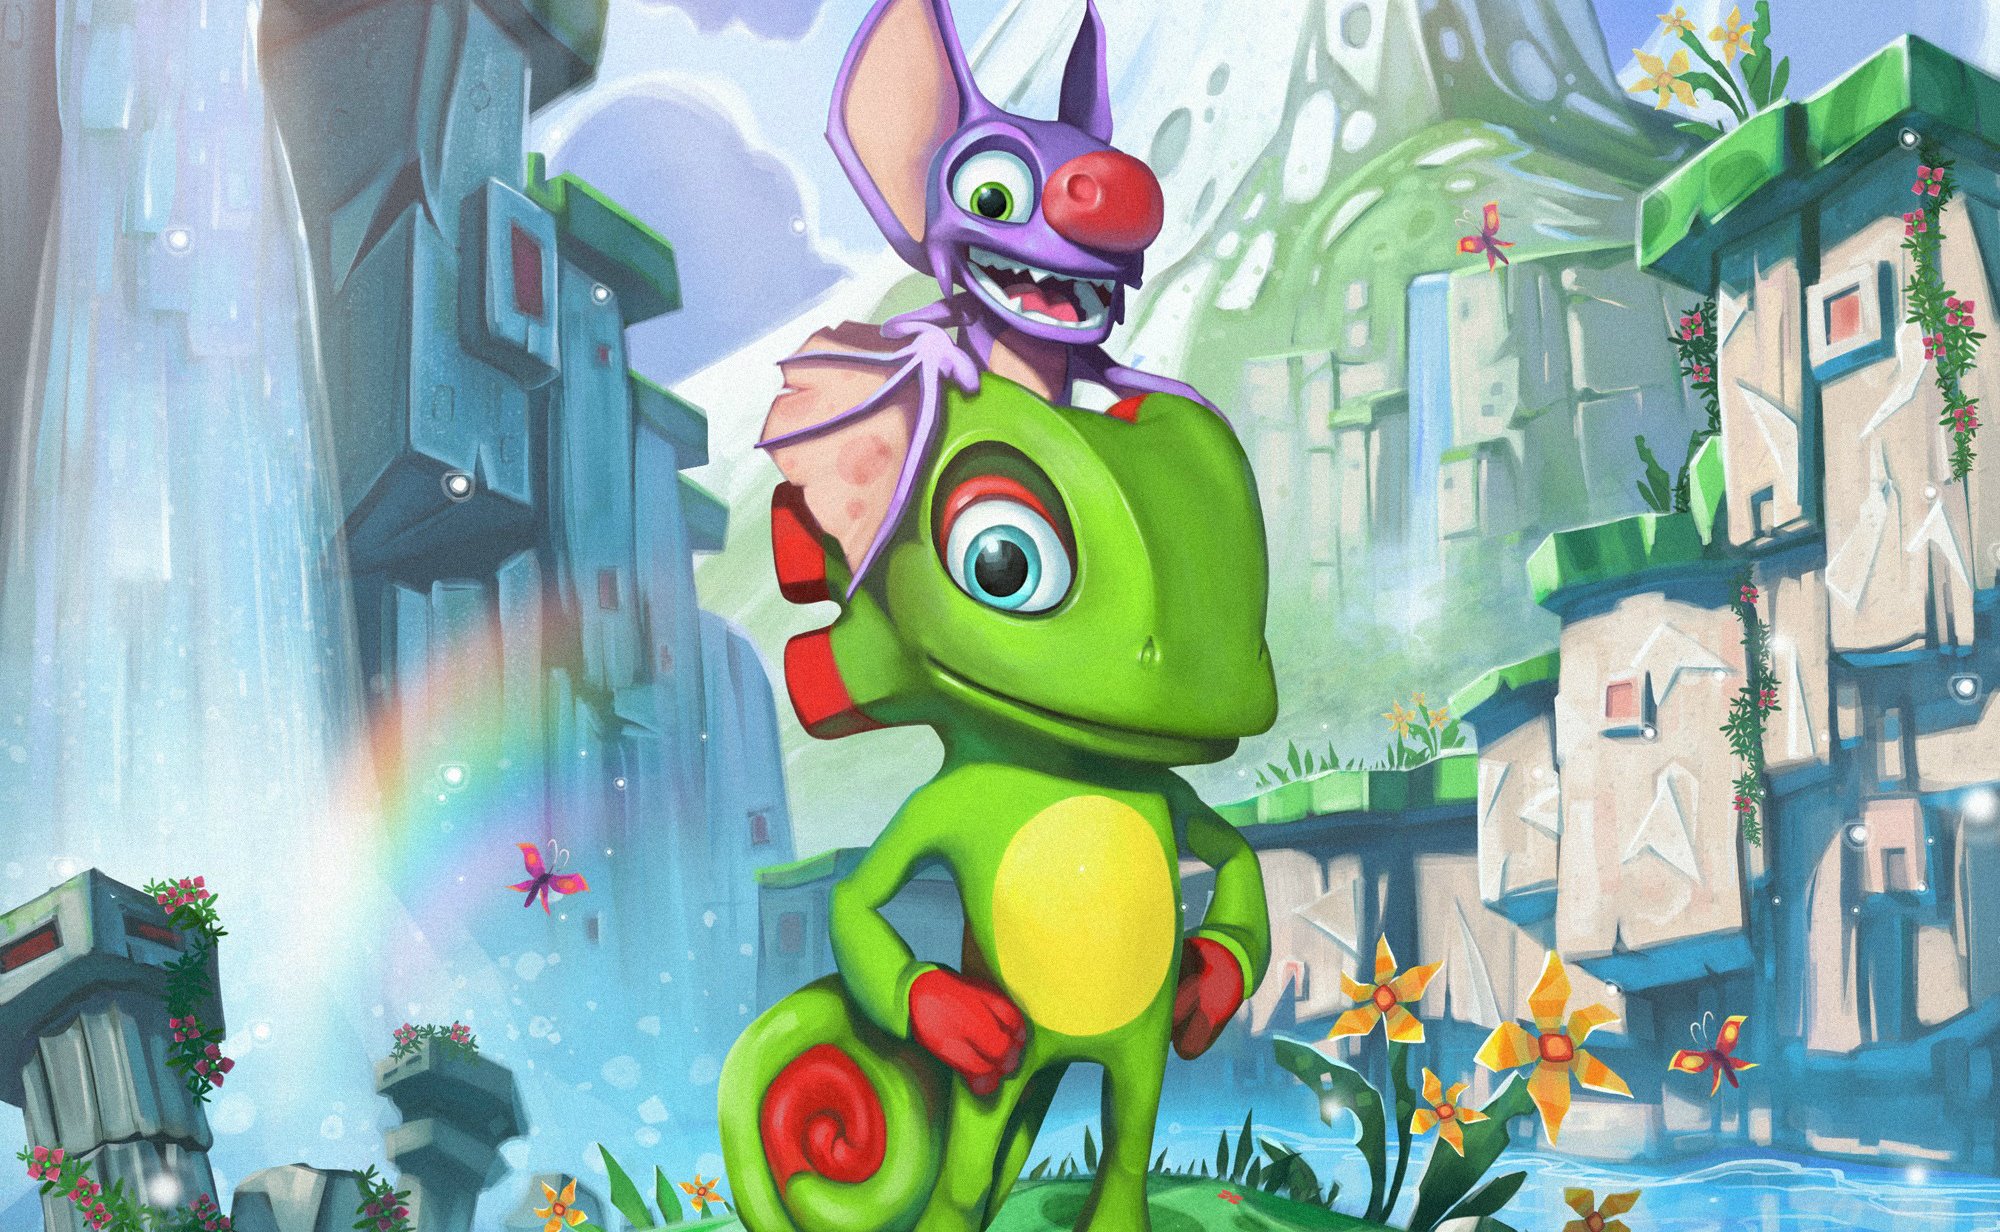 Yooka-Laylee Review: Plenty of Highs, a Few Lows, Too